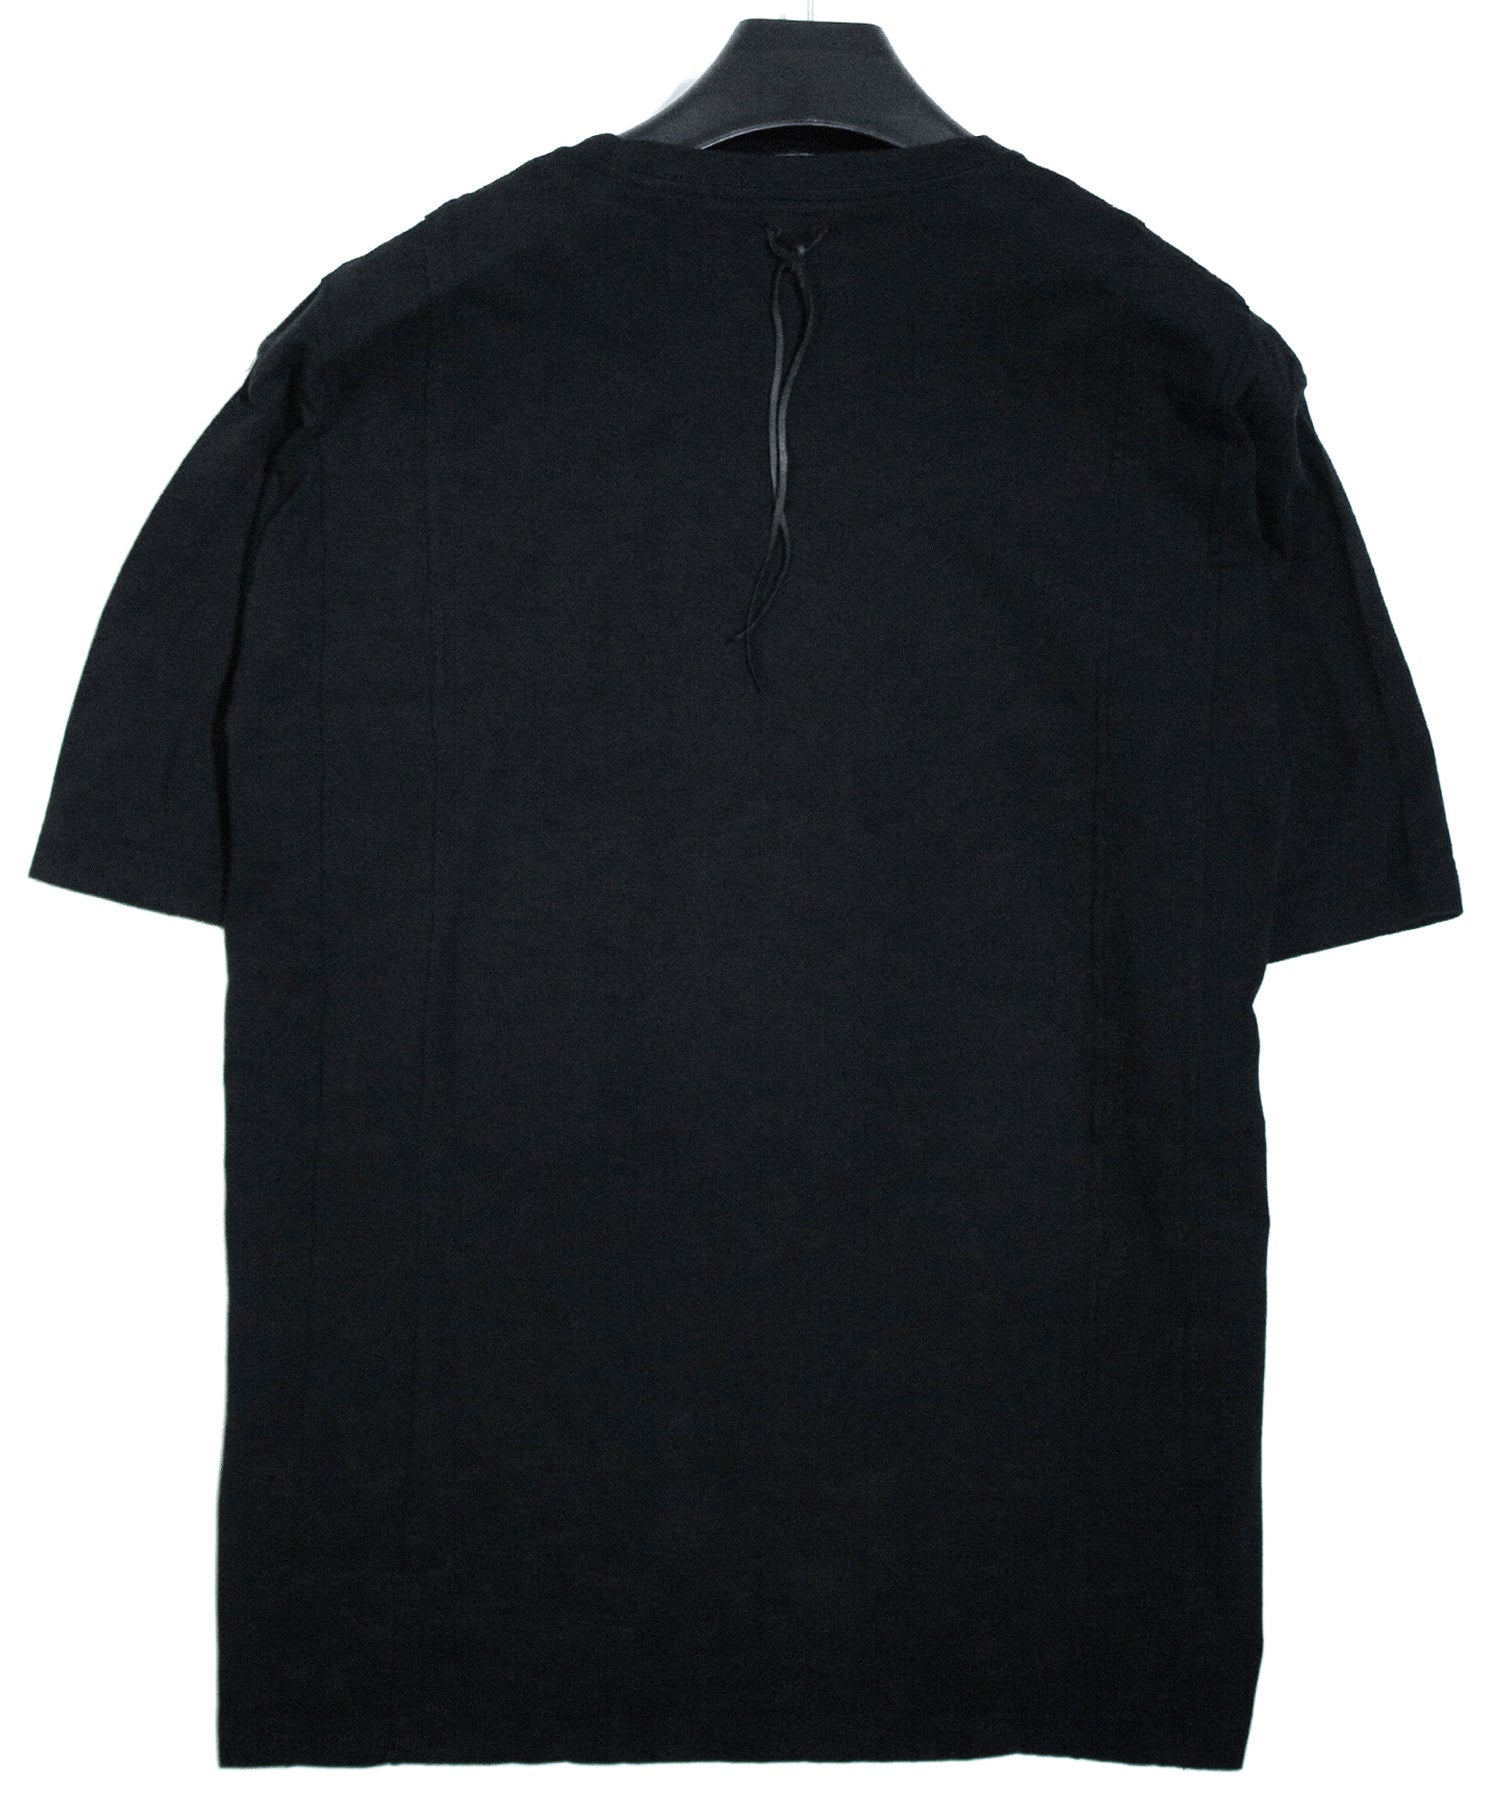 Load image into Gallery viewer, 【Flagship shop limited color】Natural Soft Cotton Oversize Crew Neck T-shirt - BLACK